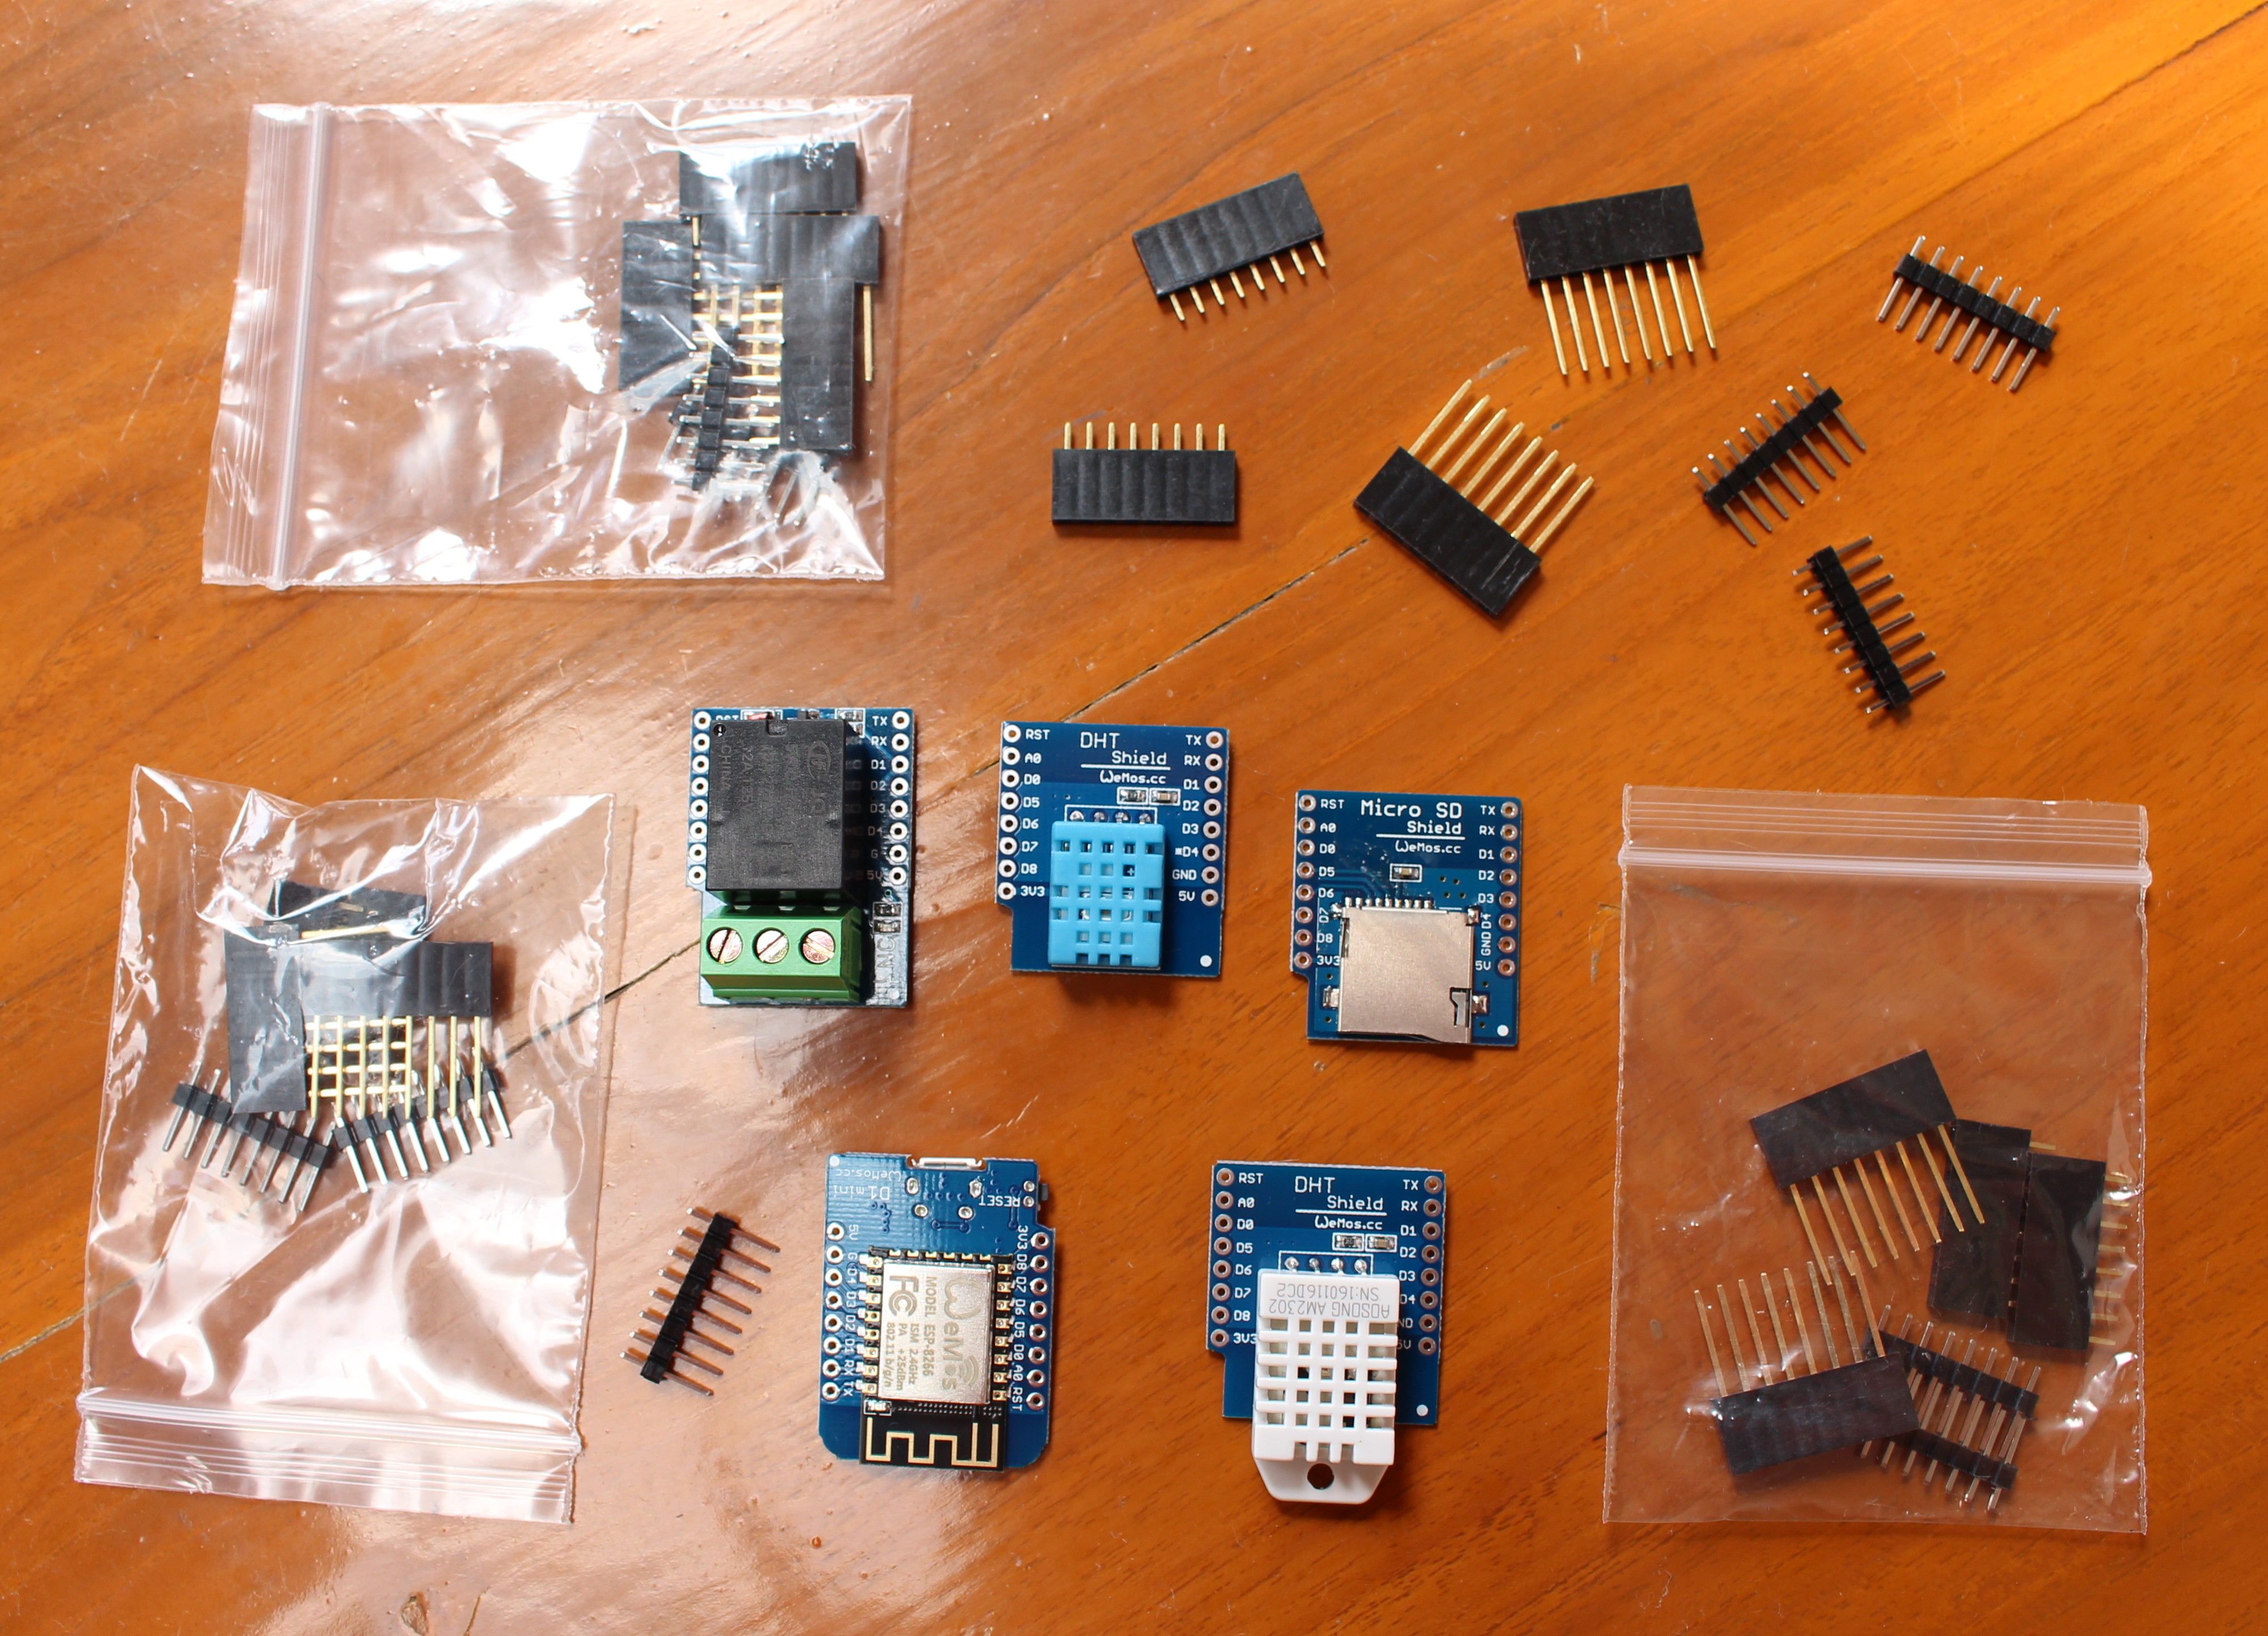 Getting Started with Wemos D1 mini ESP8266 Board, DHT & Relay